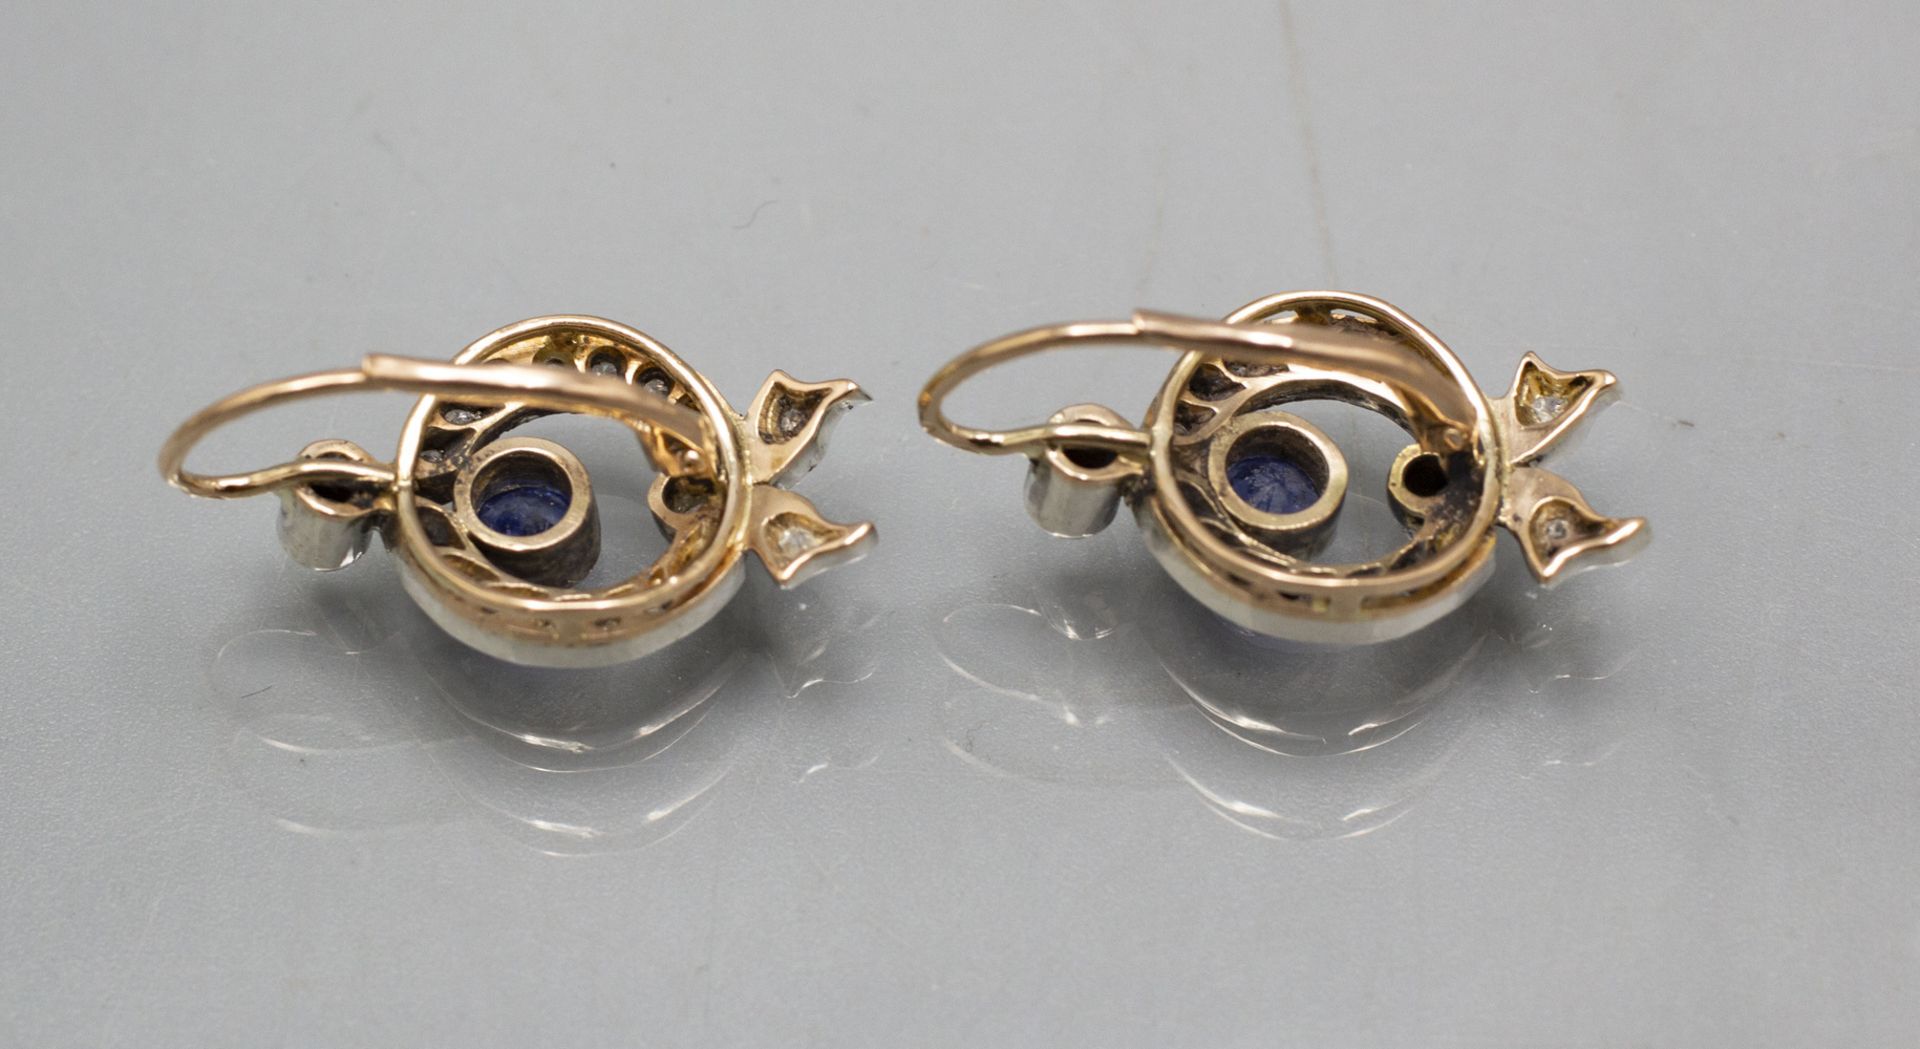 Paar Ohrringe mit Saphir und Diamanten / A pair of 14 ct gold earrings with diamonds and sapphire - Image 2 of 2